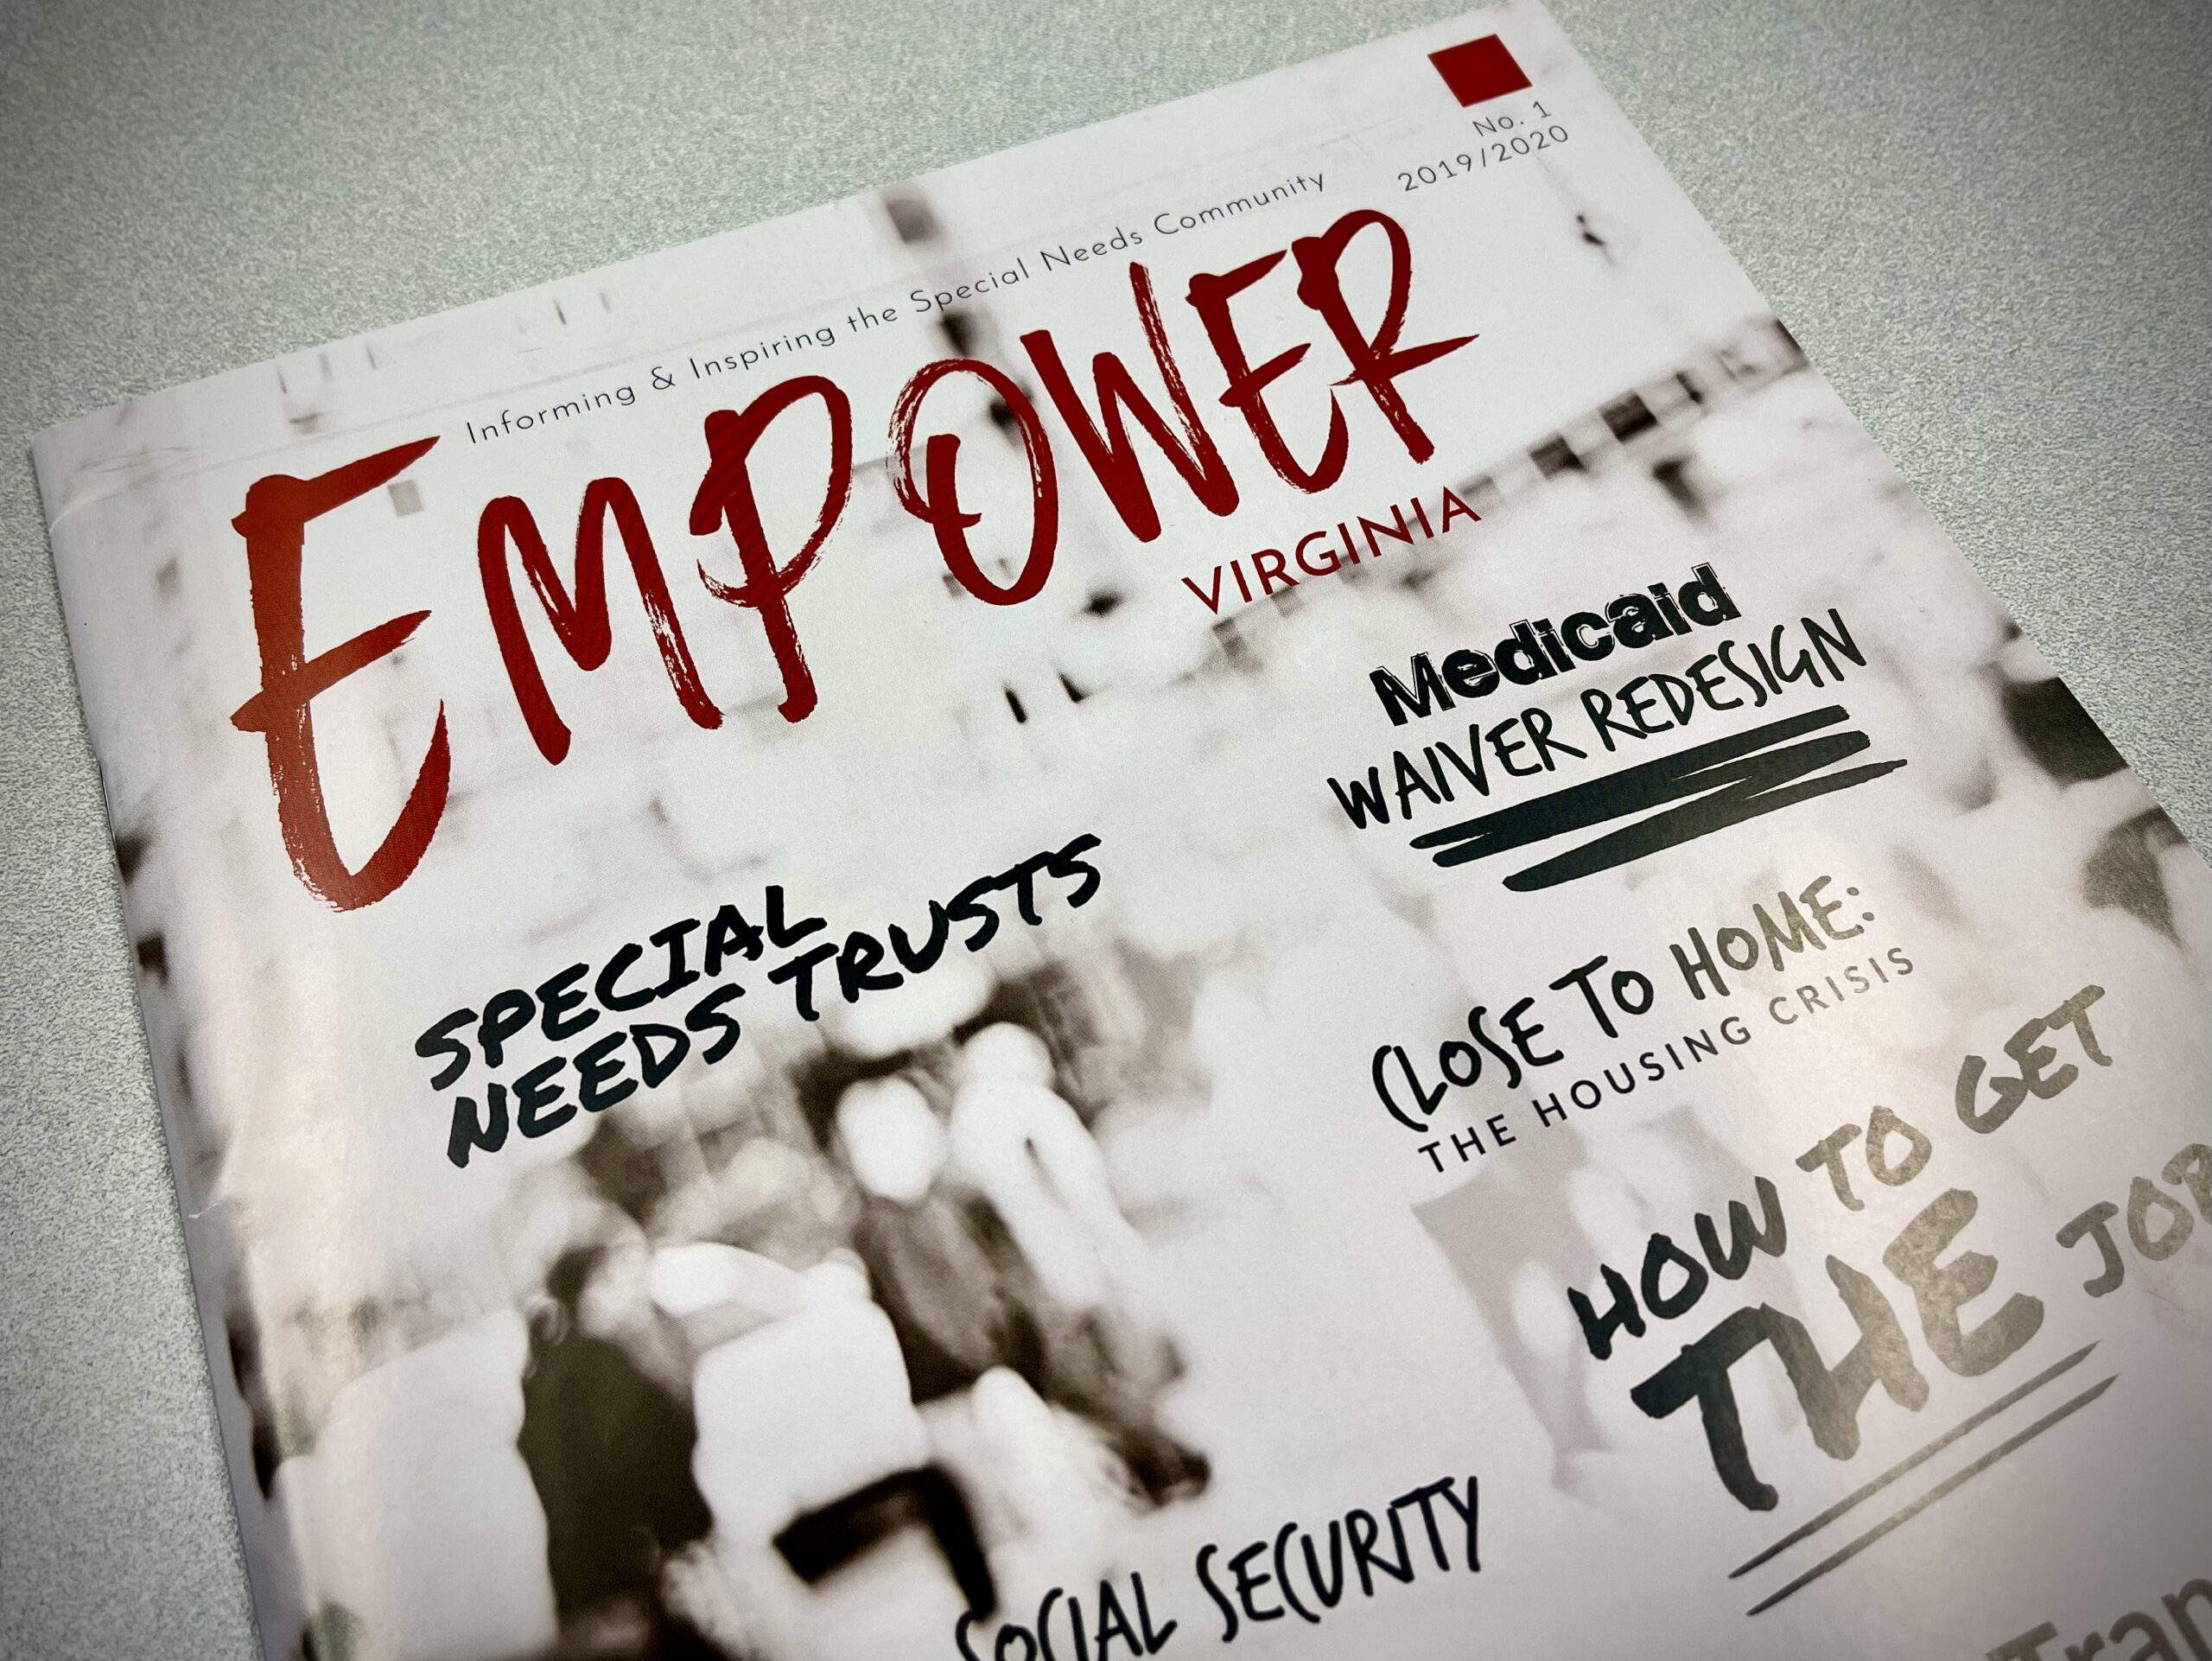 A copy of The Arc of Northern Virginia's Empower magazine sits on an off-white desk top.